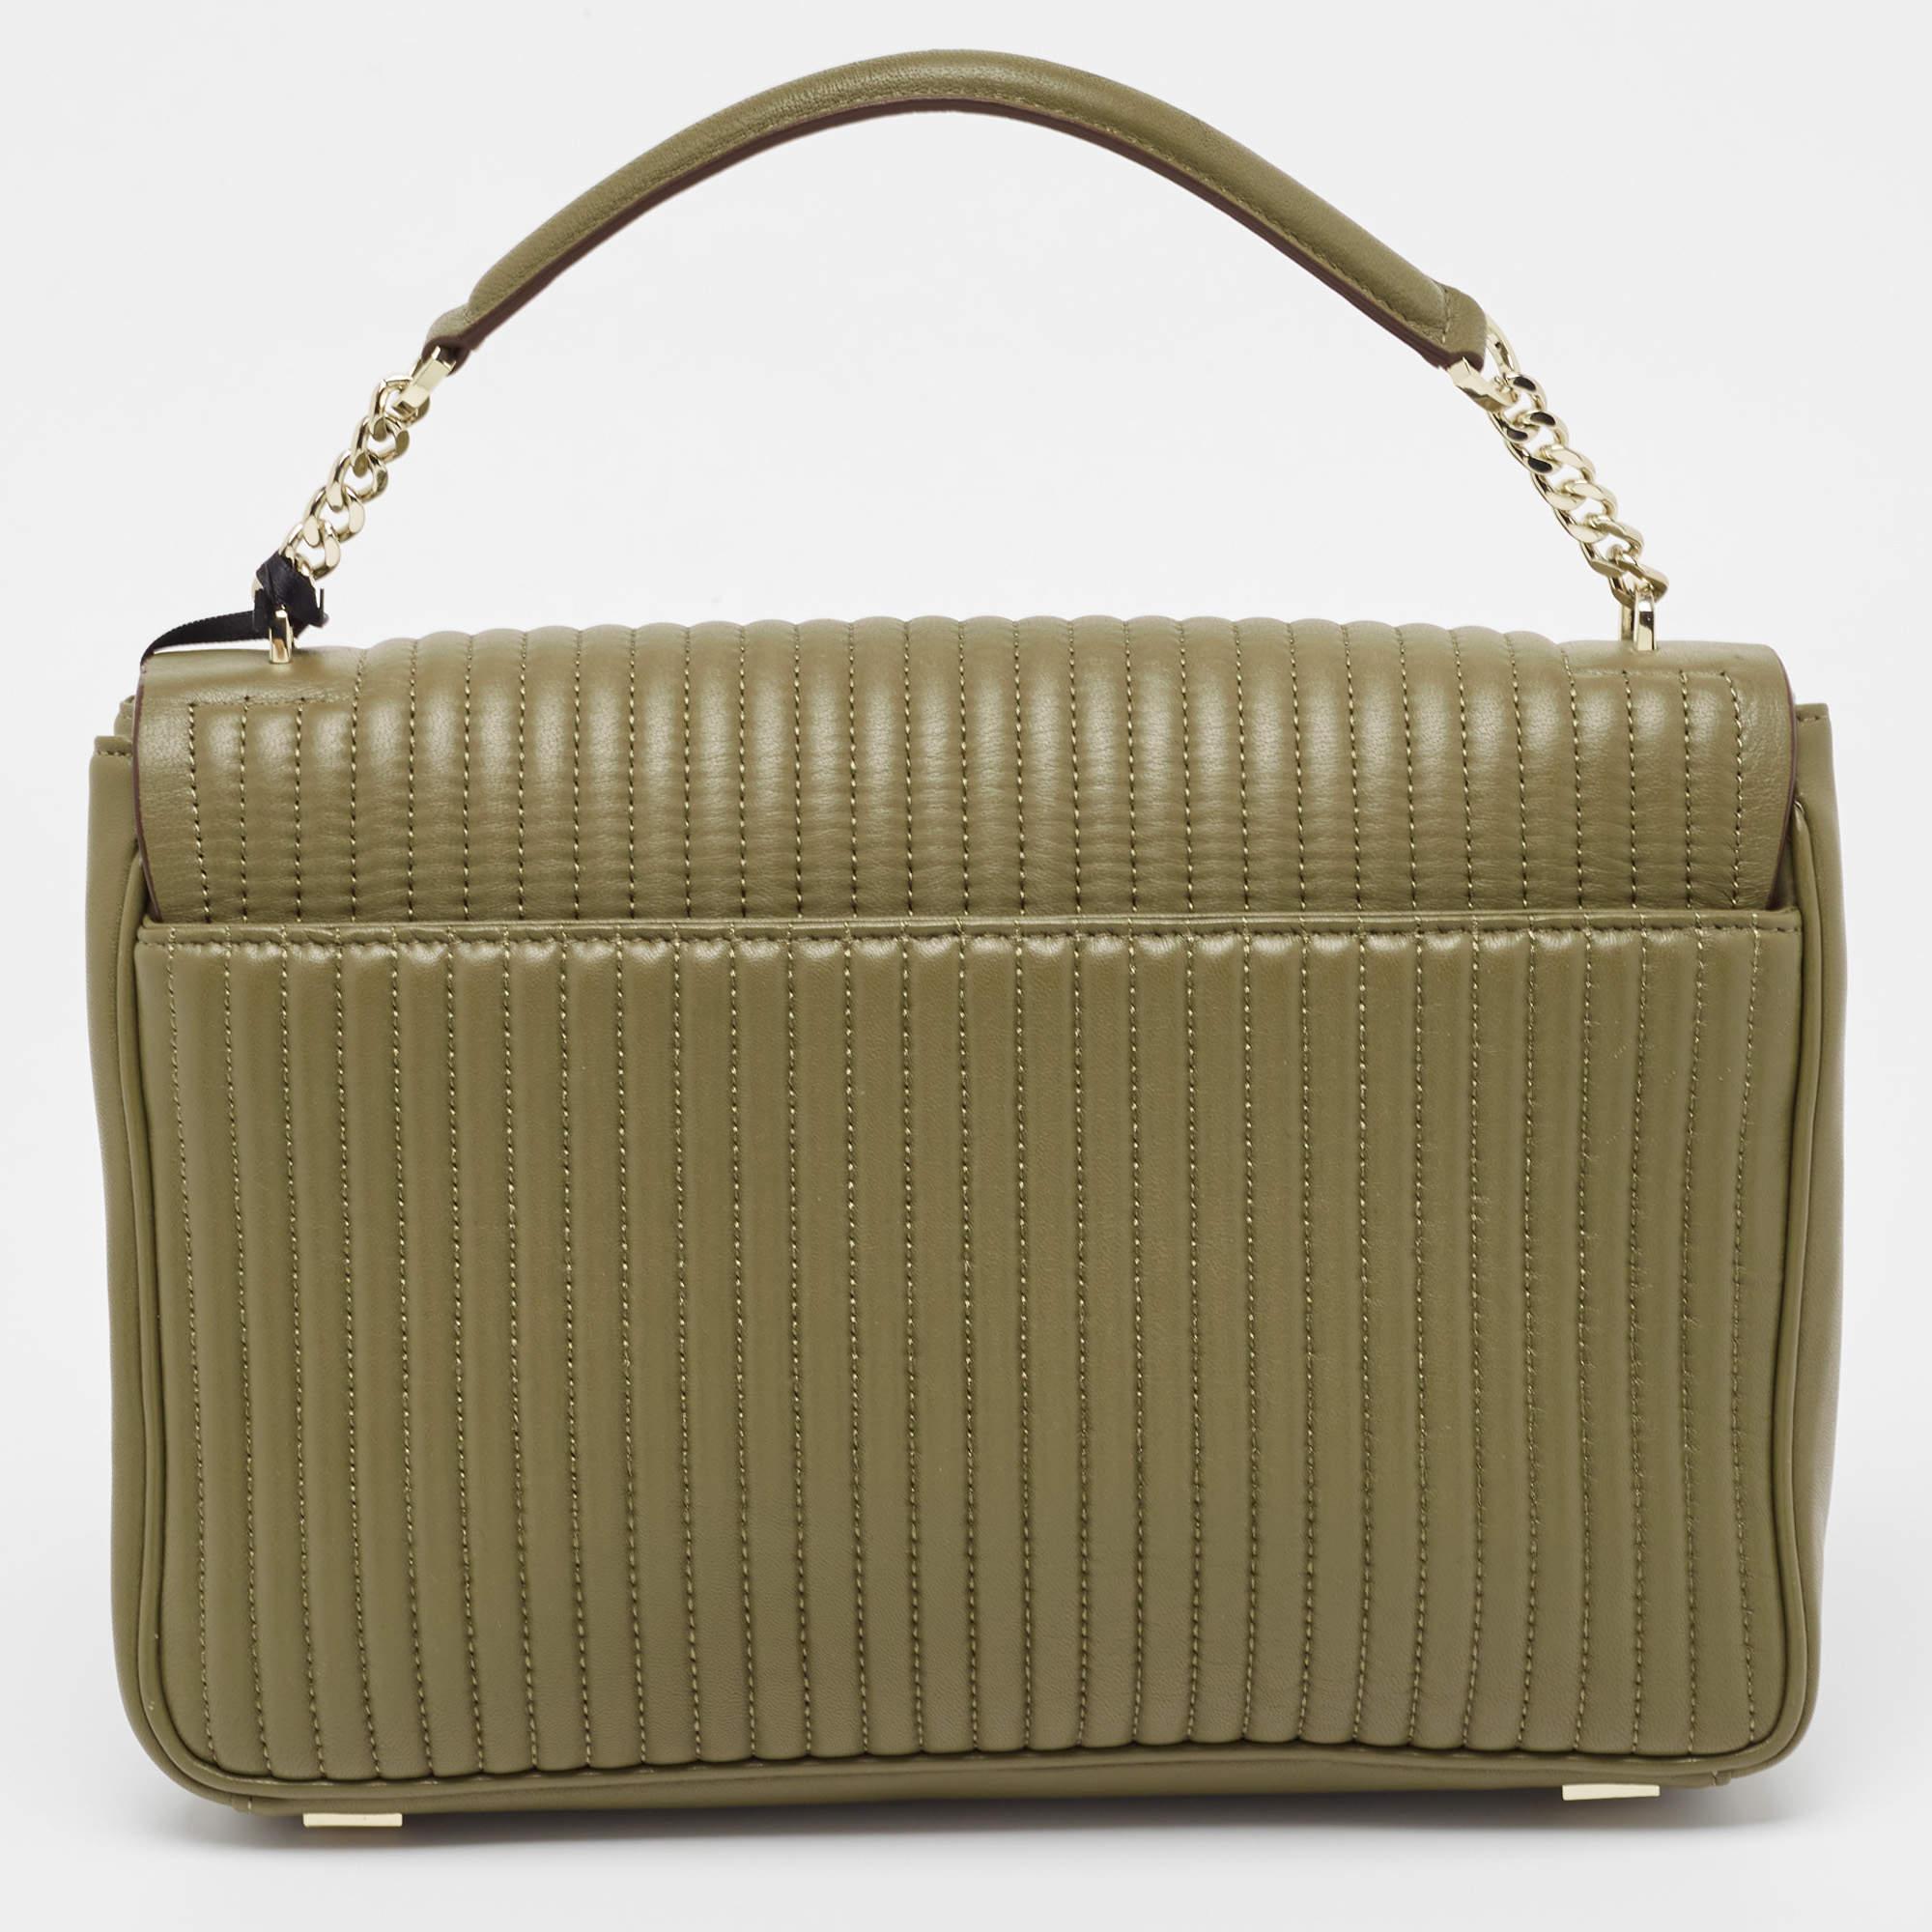 A practical design with just the right dose of style, this DKNY bag is a worthy buy. It is crafted from quilted leather and decorated with brand detailing on the flap. The bag has a canvas-lined interior, a top handle, and a shoulder